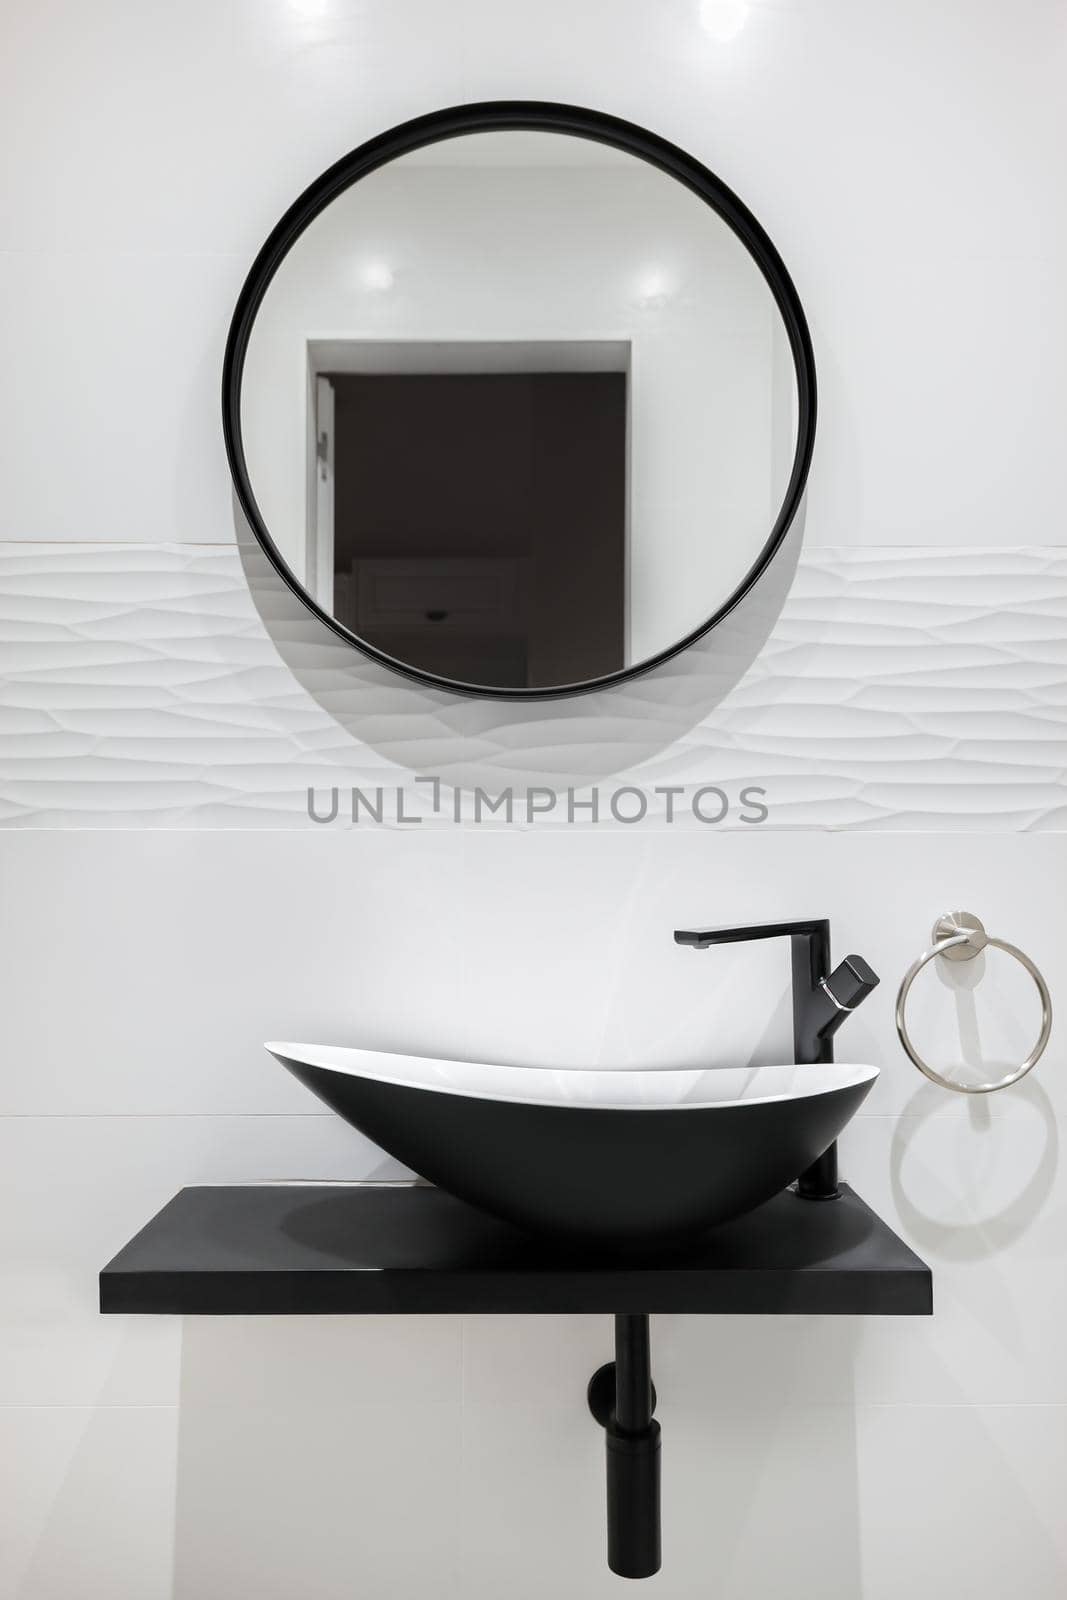 White tiled bathroom with black faucet and basin and round mirror. Modern and minimalist style. by apavlin